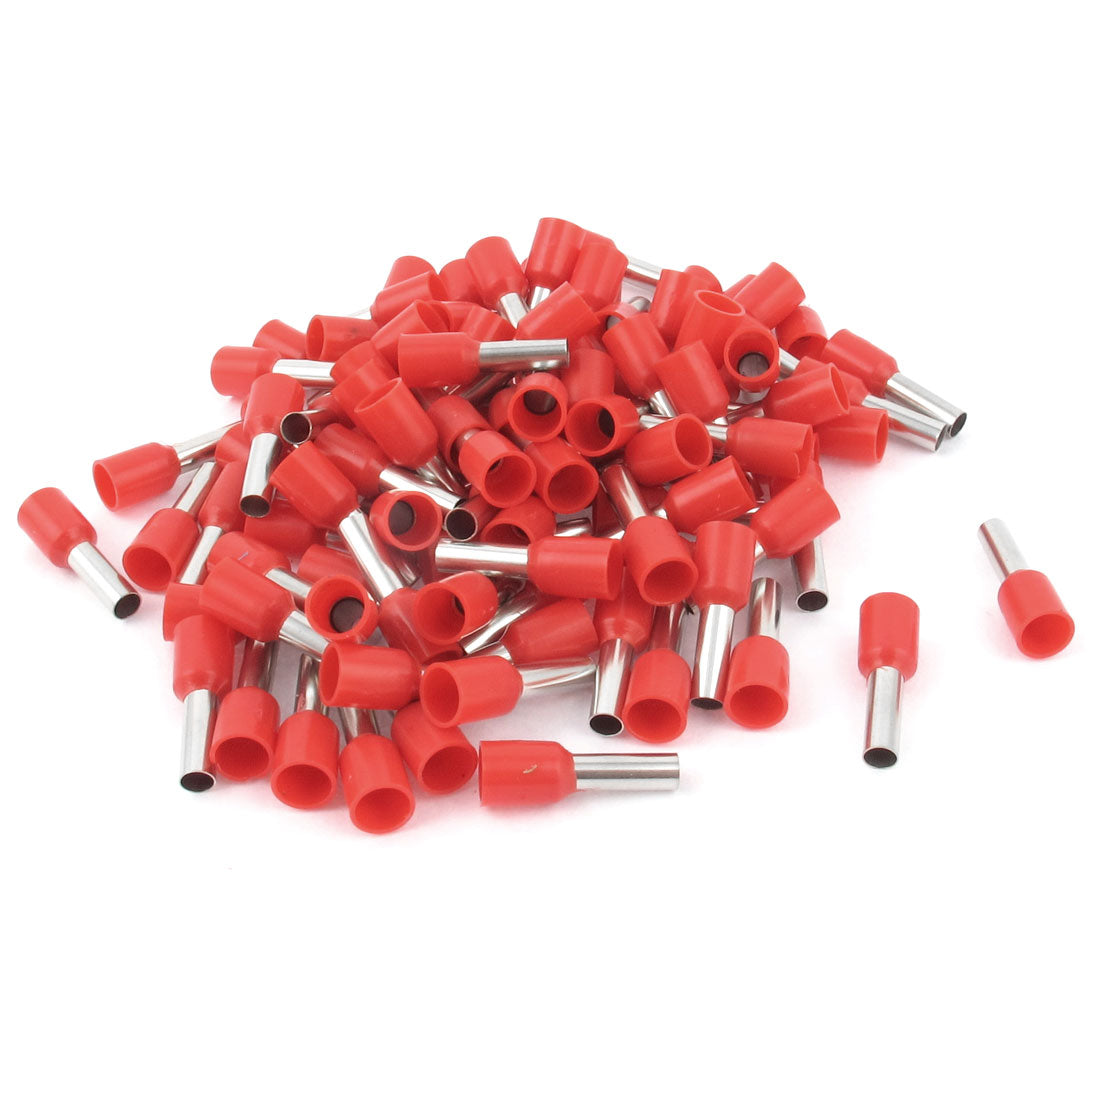 uxcell Uxcell 100Pcs E4009 12AWG Insulated Ferrule Wire Cord End Terminal Crimp Connector Red